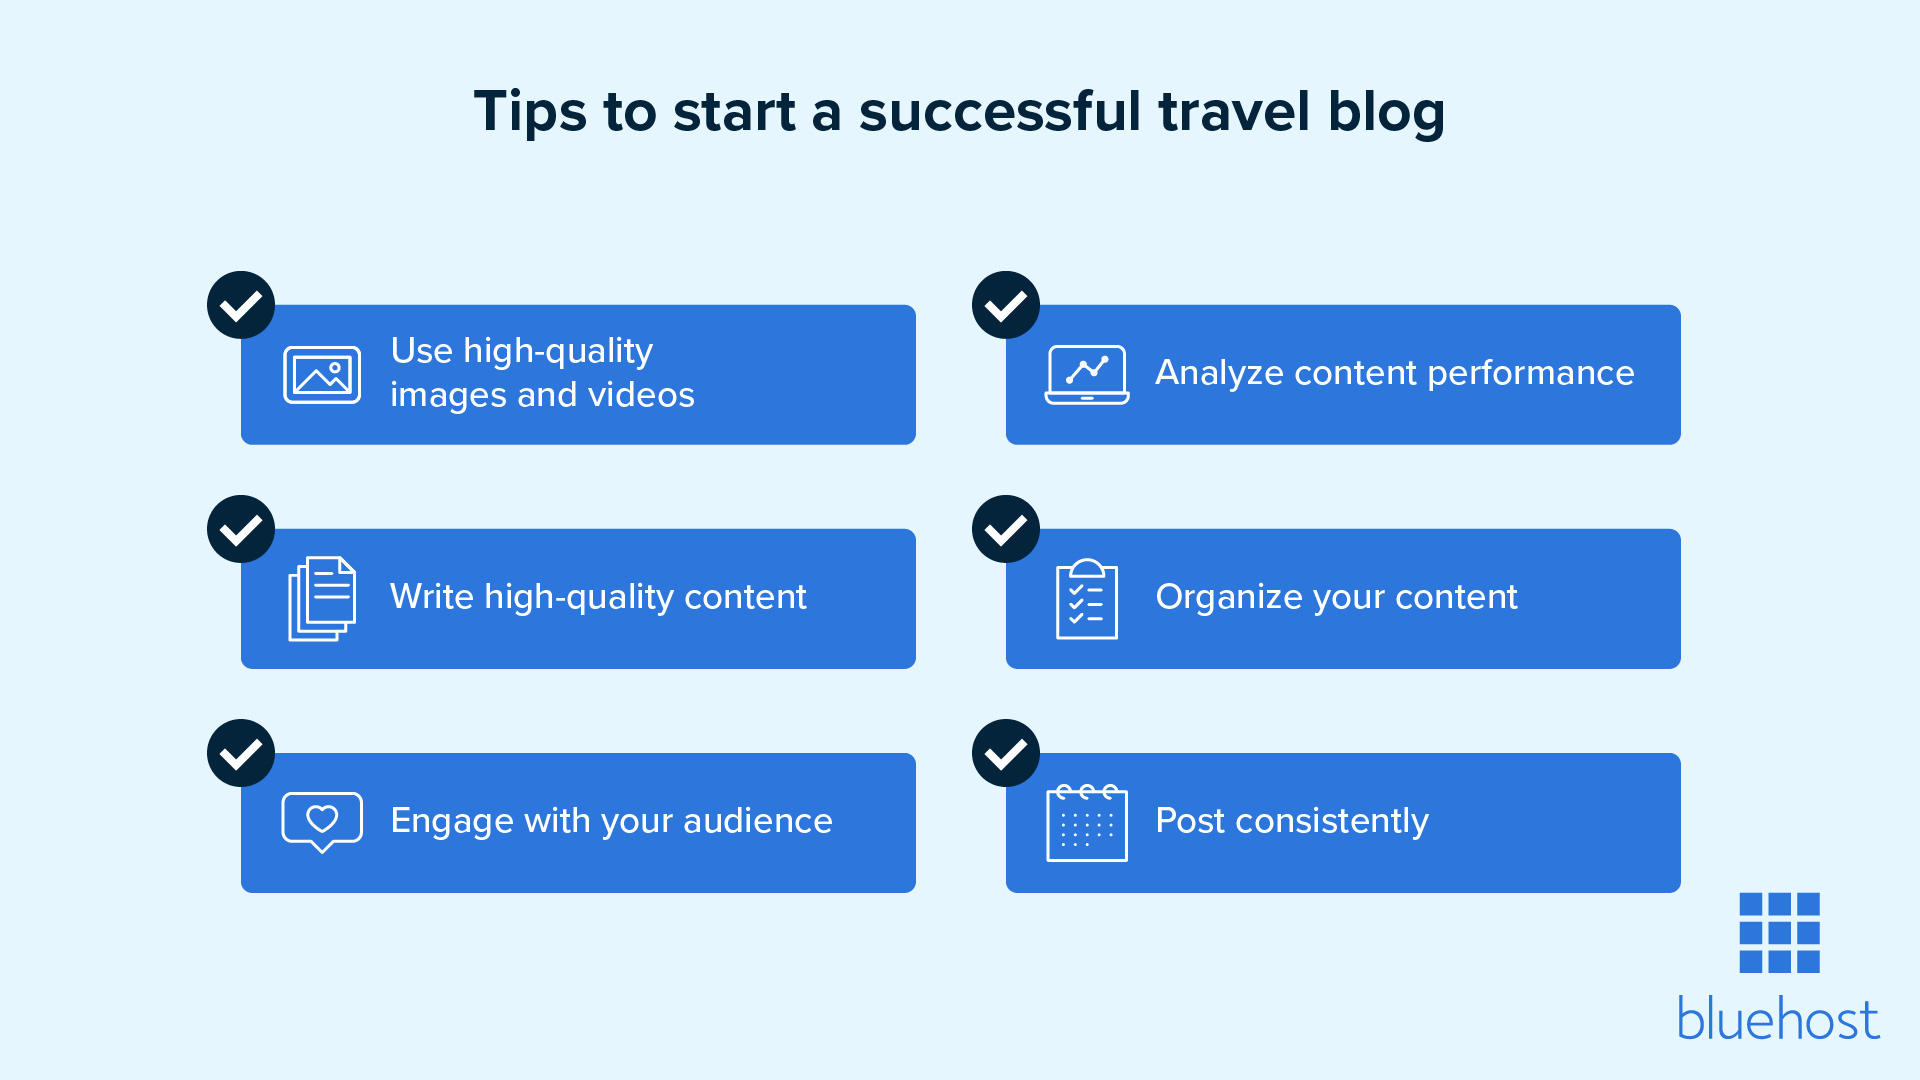 Make your travel blog successful following these best practices.